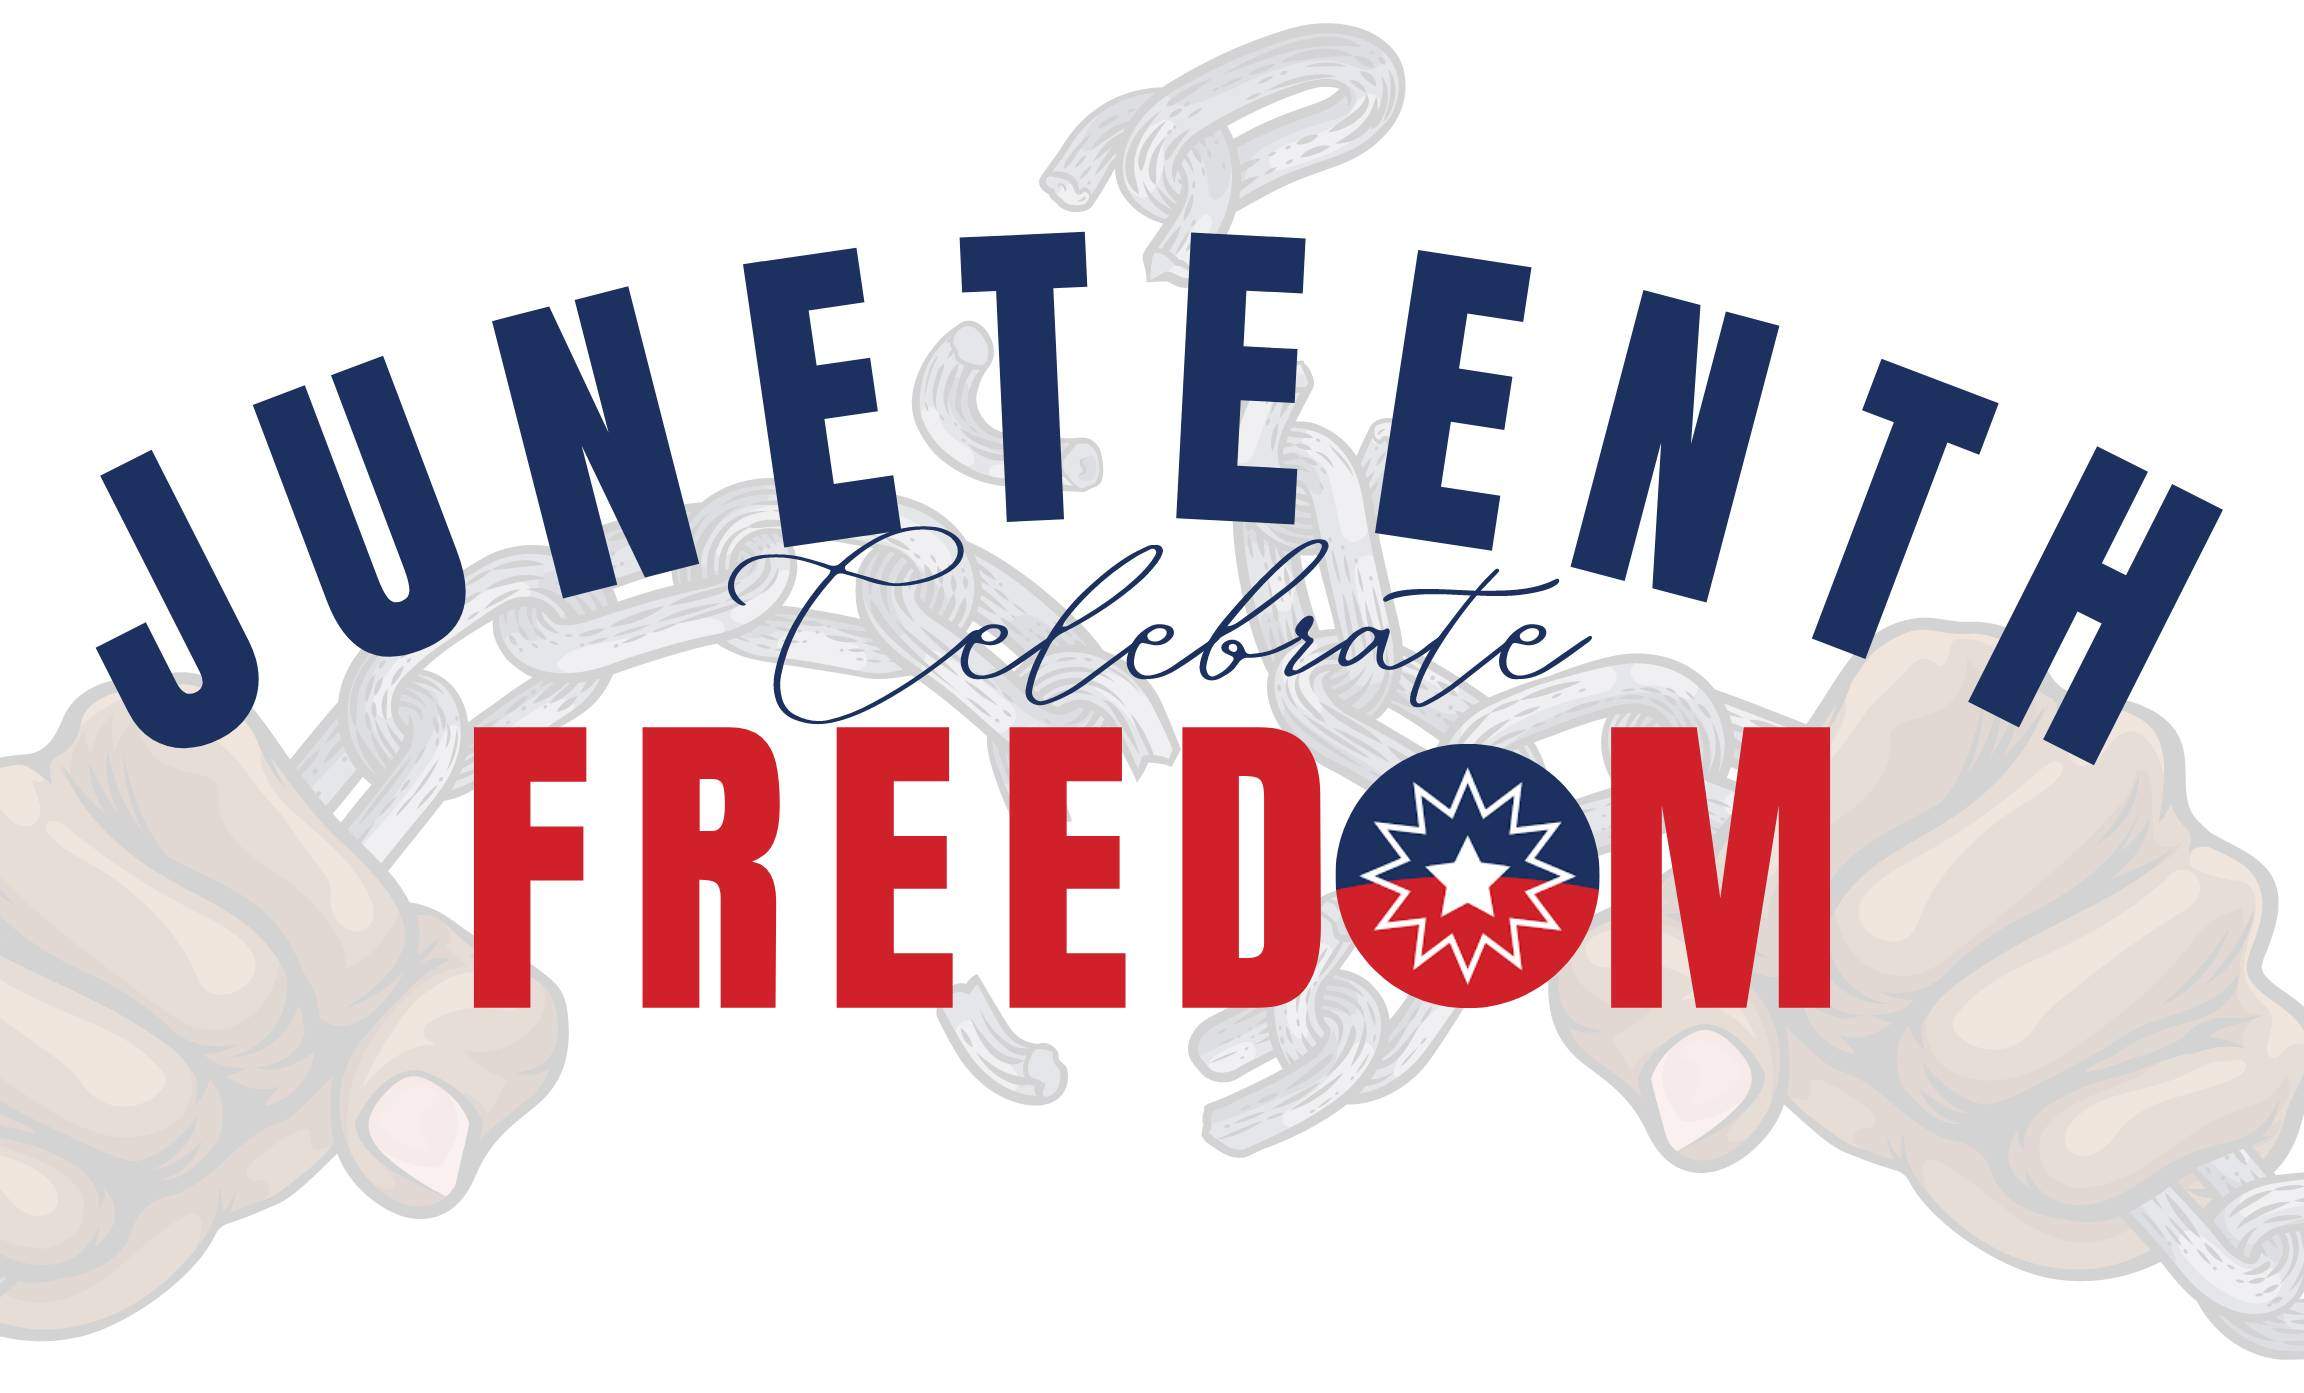 The words "Juneteenth Celebrate Freedom" with a watermark of two fists snapping a chain